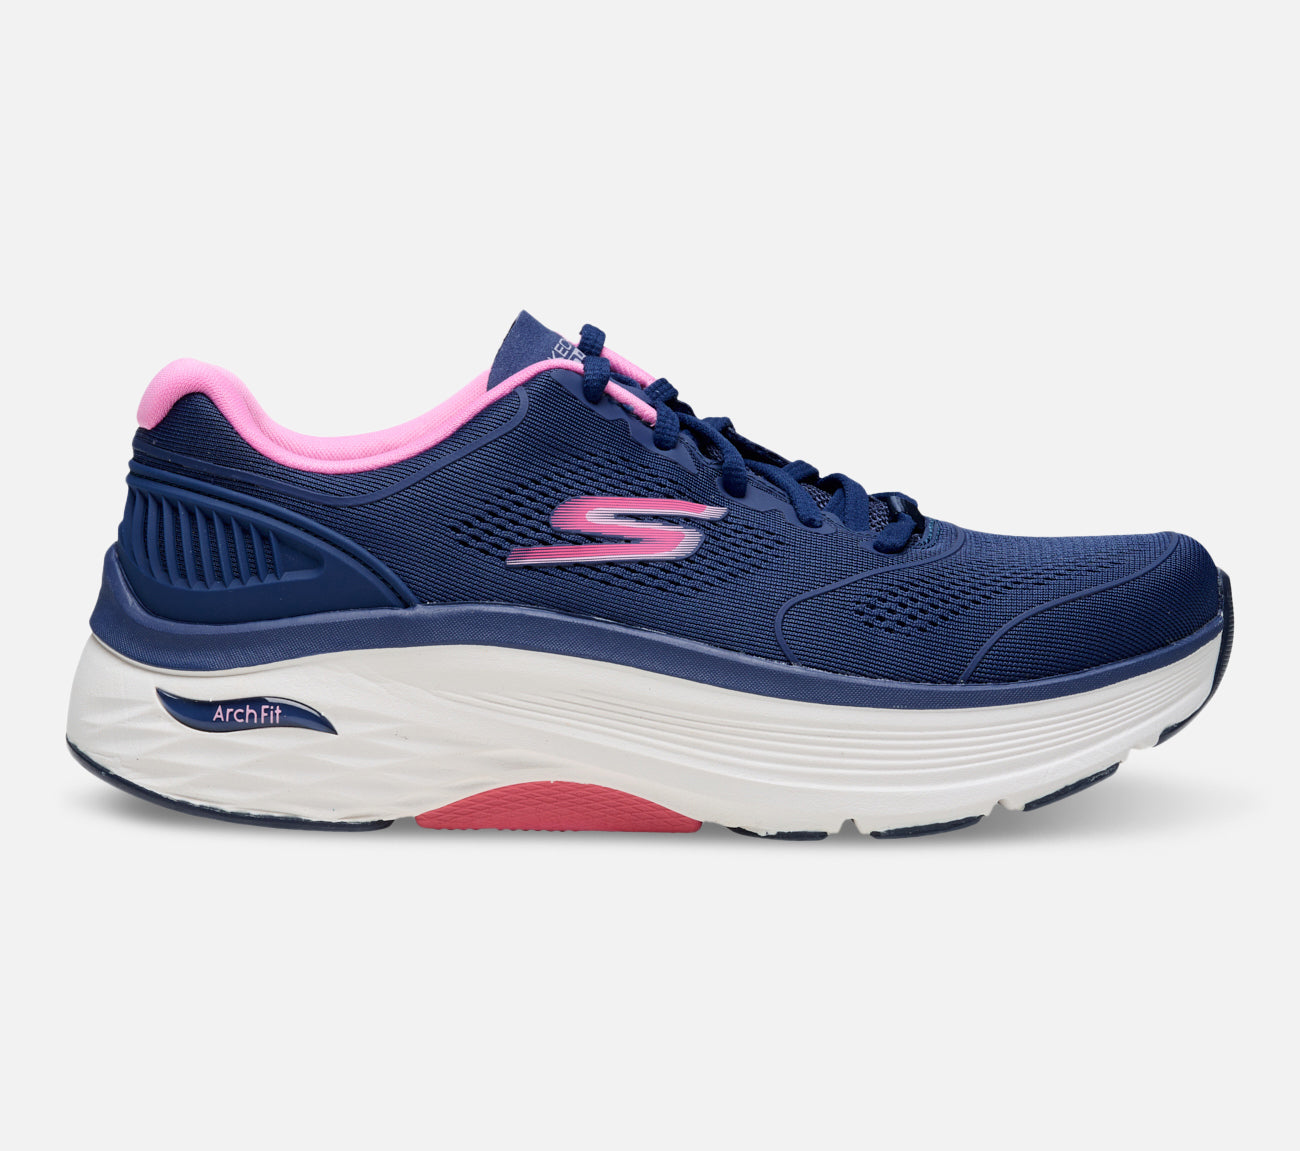 Max Cushioning Arch Fit - Switchboard Shoe Skechers